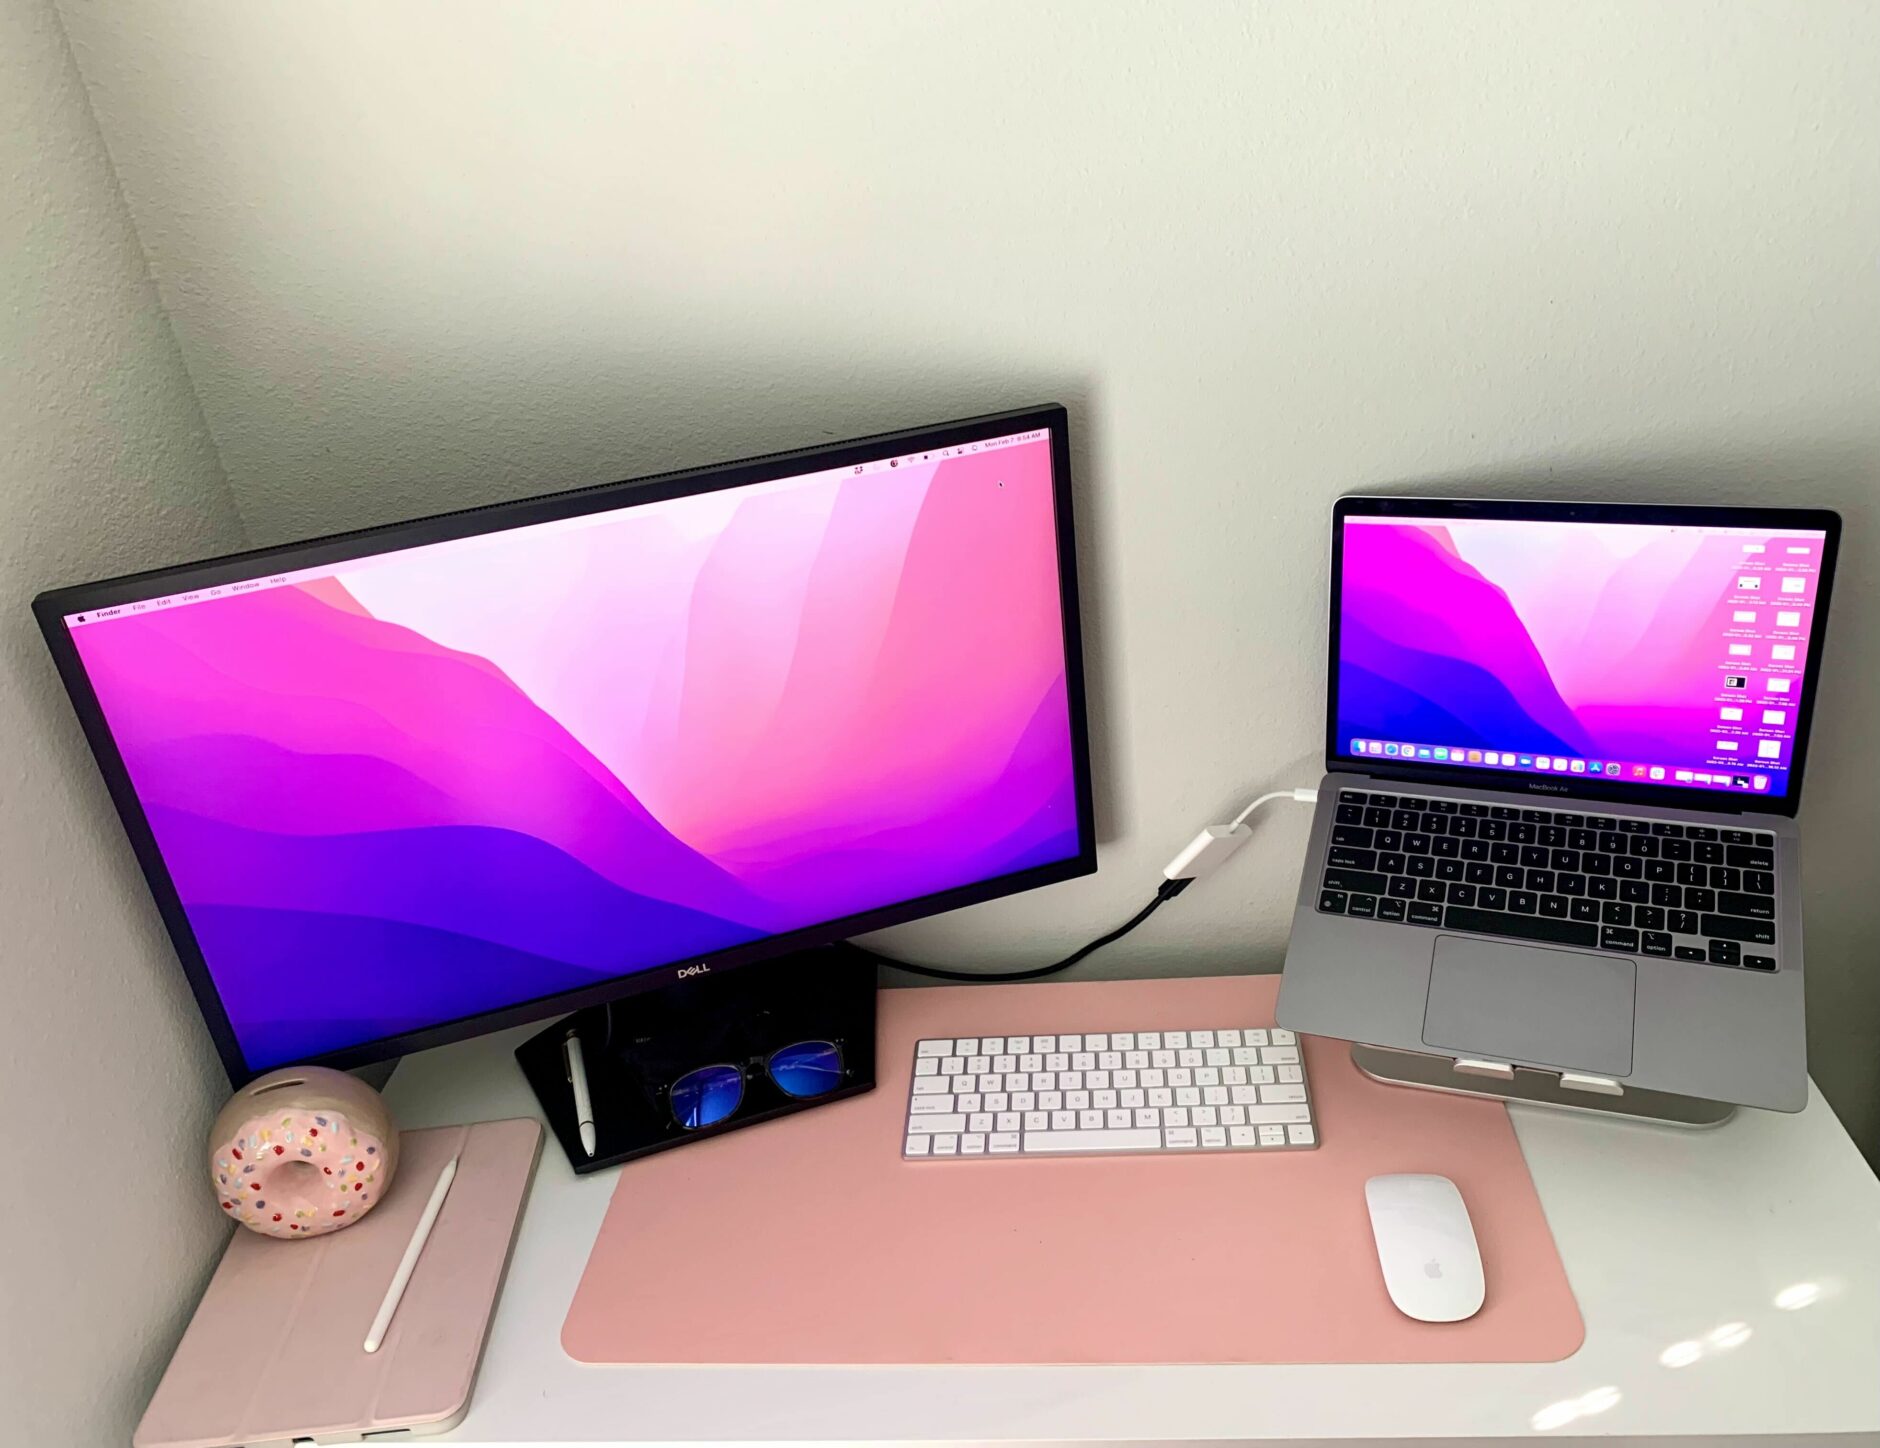 Brittany's desk setup which includes a monitor and laptop with a pink desk pad underneath. 